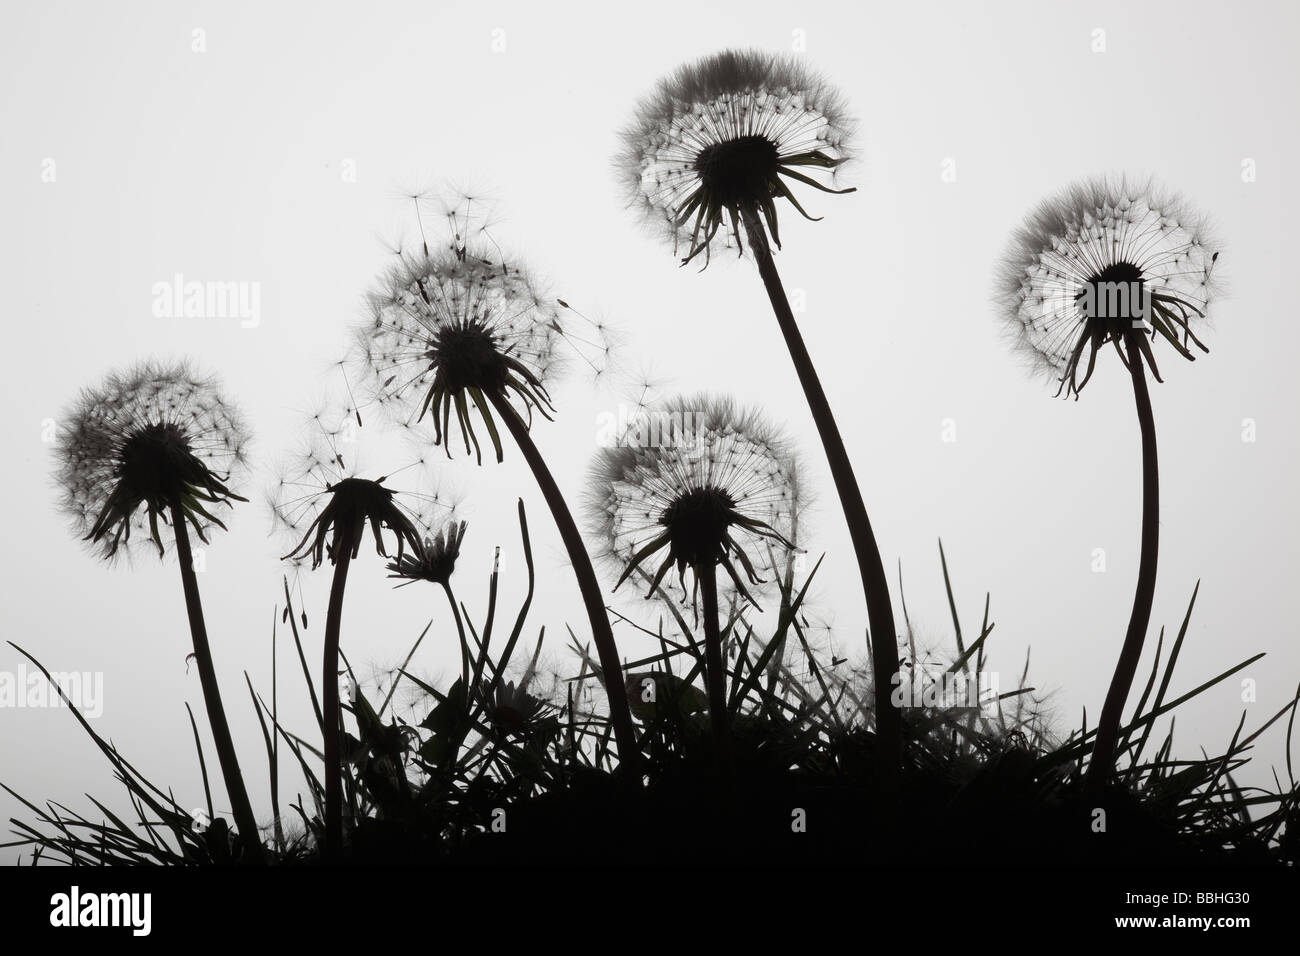 Dandelions Taxaxacum officinale seedheads against the sky Stock Photo